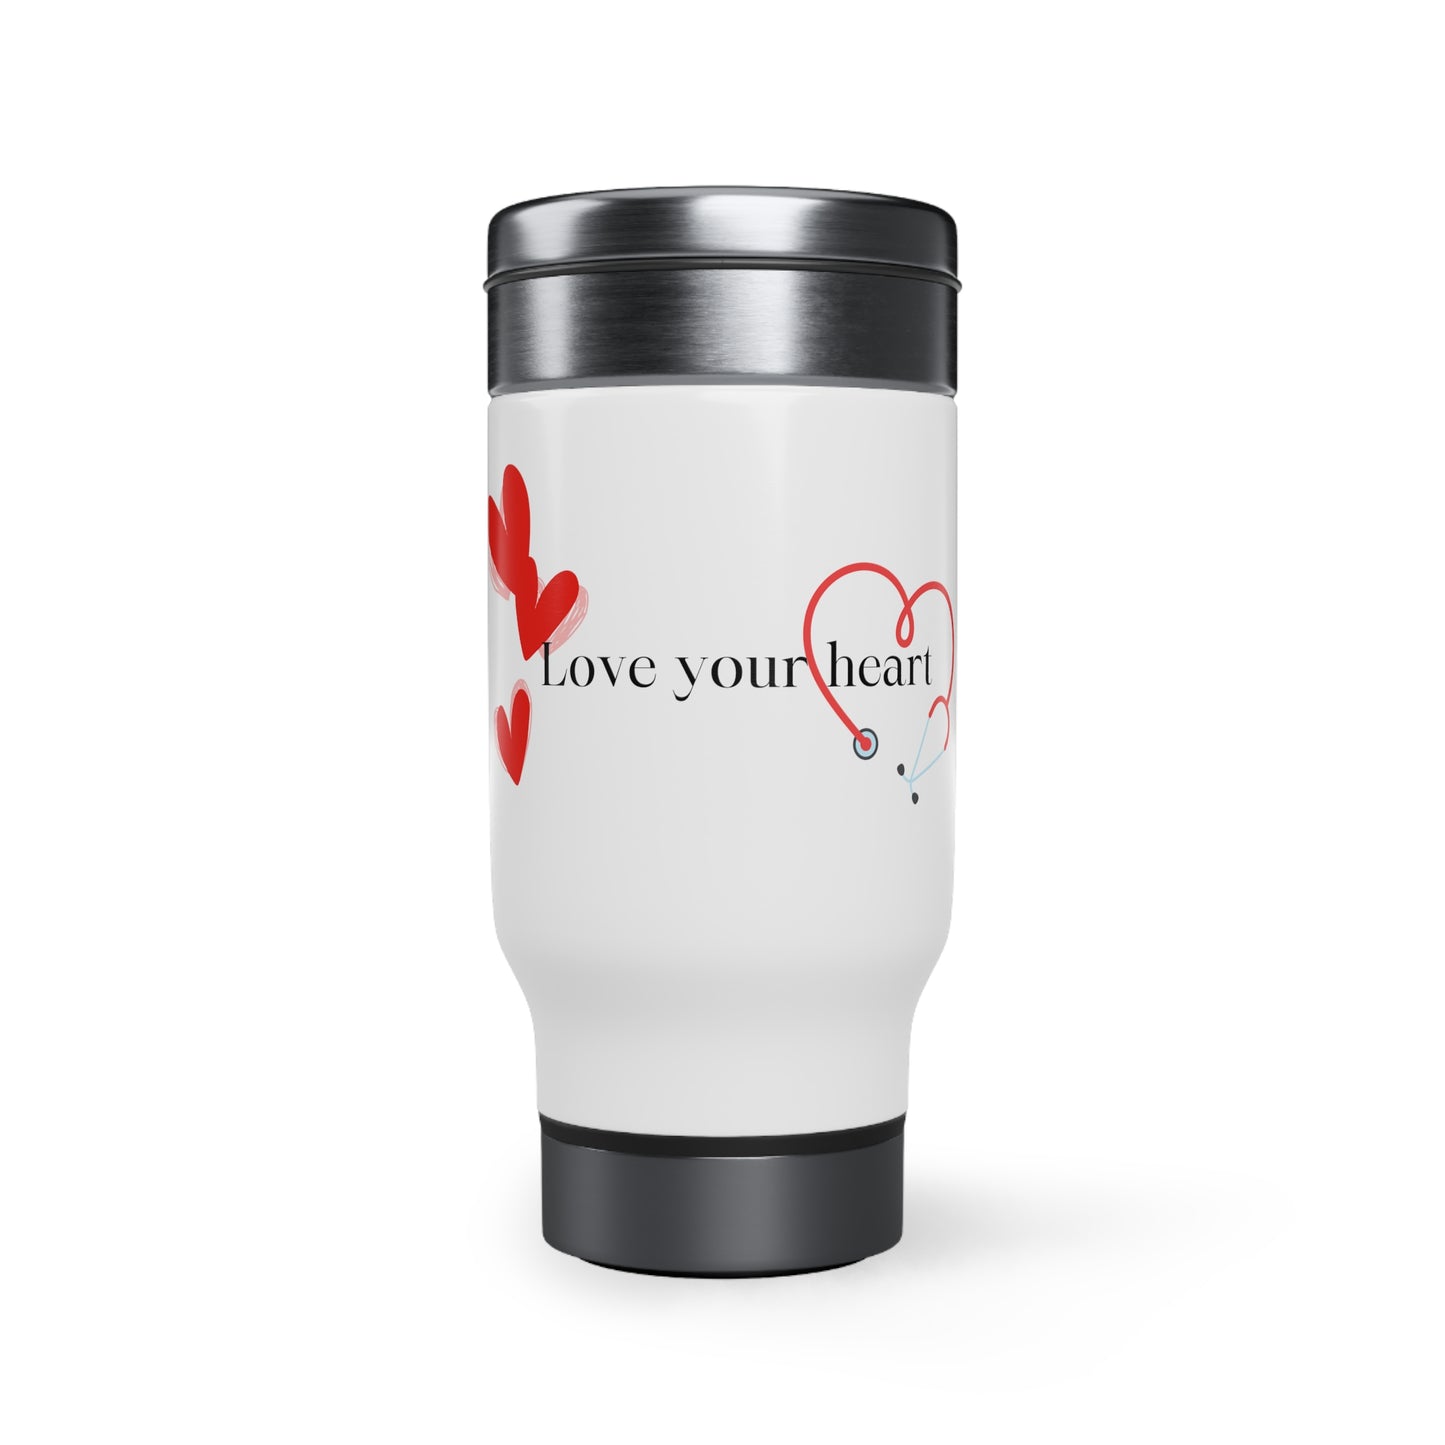 Love your heart Stainless Steel Travel Mug with Handle, 14oz